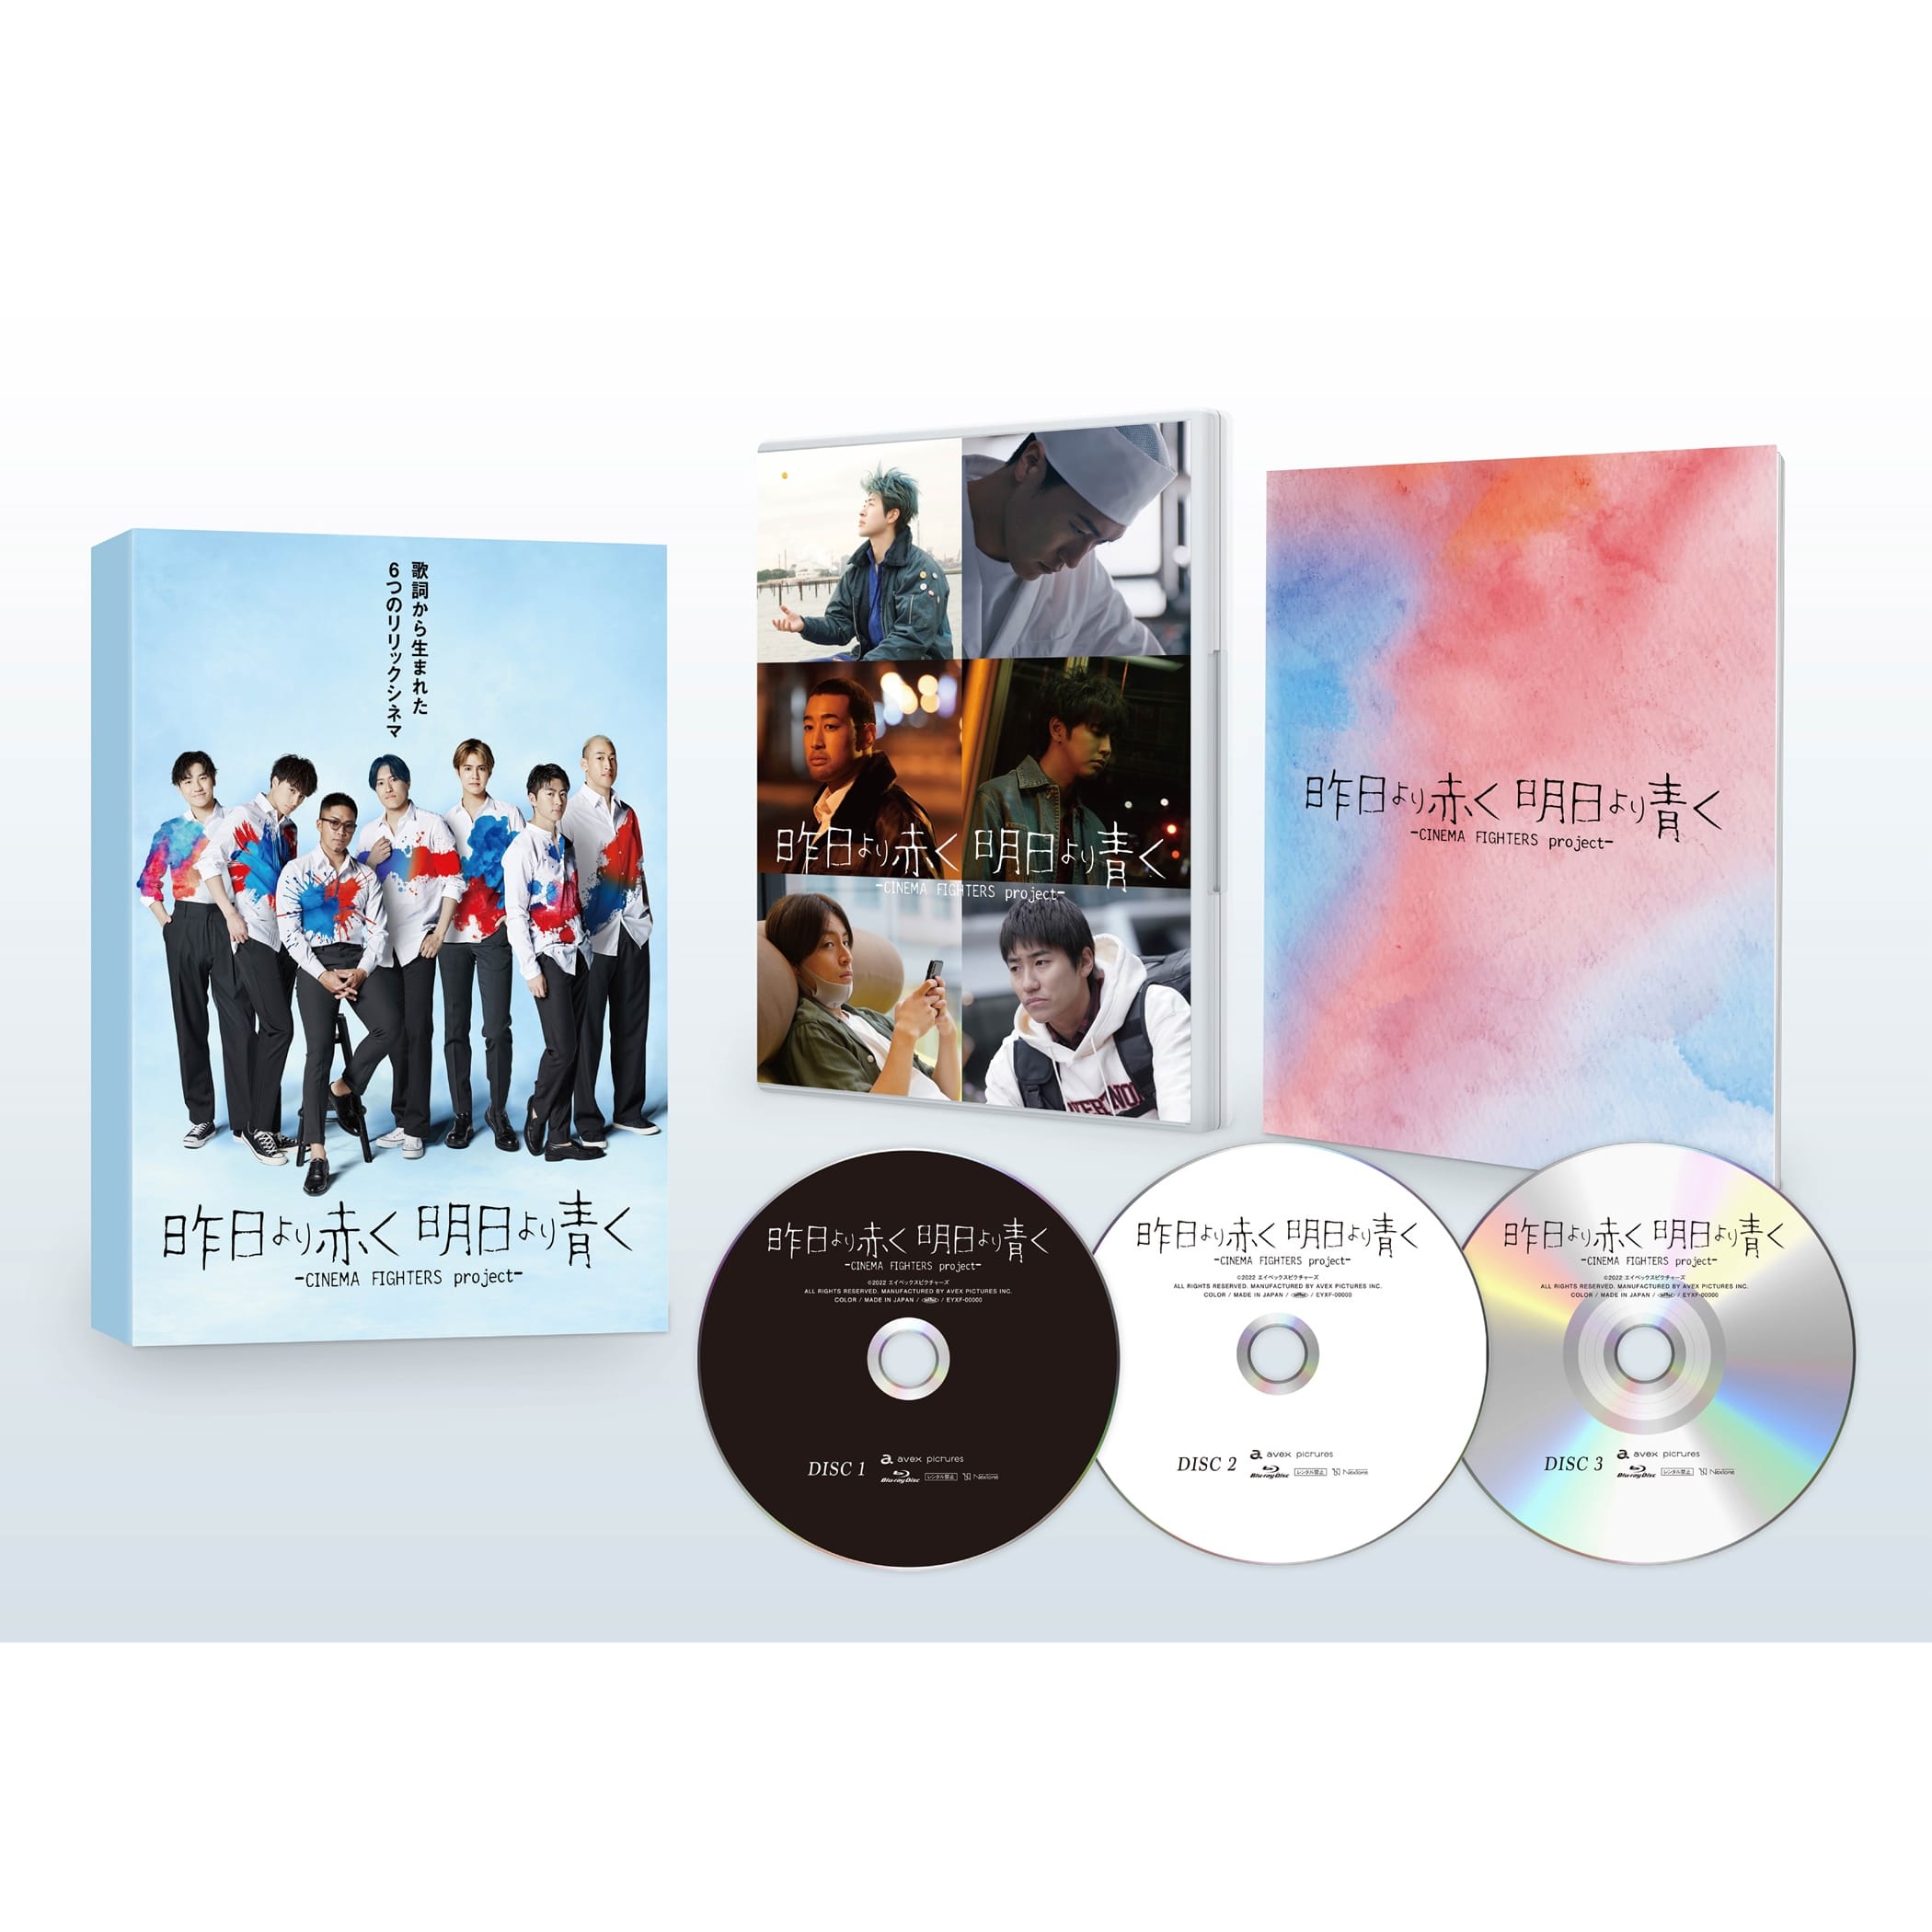 EXILE TRIBE STATION ONLINE STORE｜昨日より赤く明日より青く-CINEMA FIGHTERS project- 豪華版 DVD